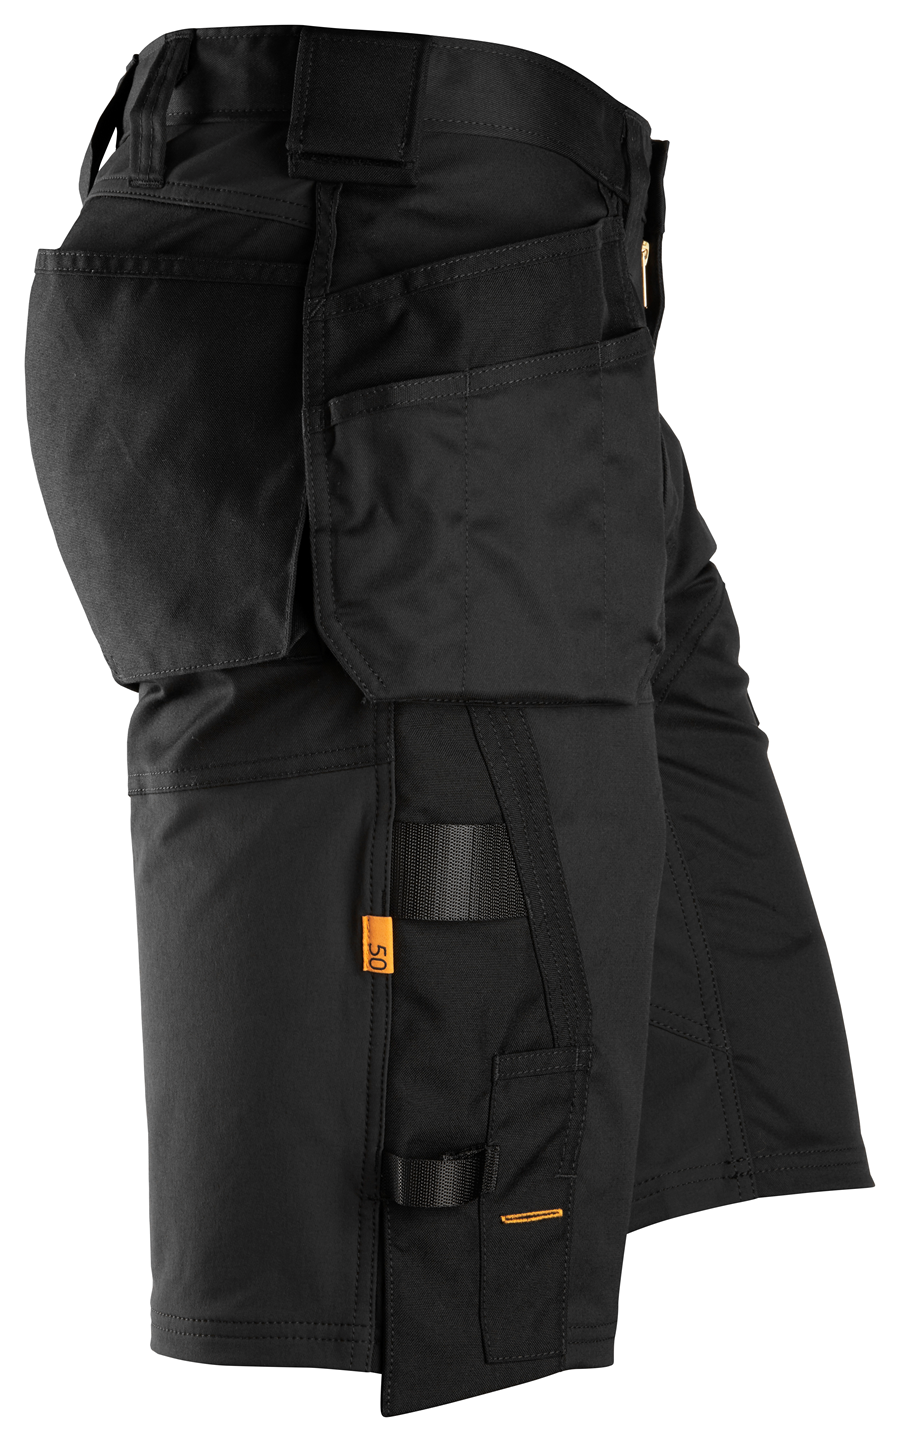 Snickers 6151 AllroundWork, Stretch Loose Fit Work Shorts Holster Pockets -  A to Z Safety Centre | PPE | Uniforms